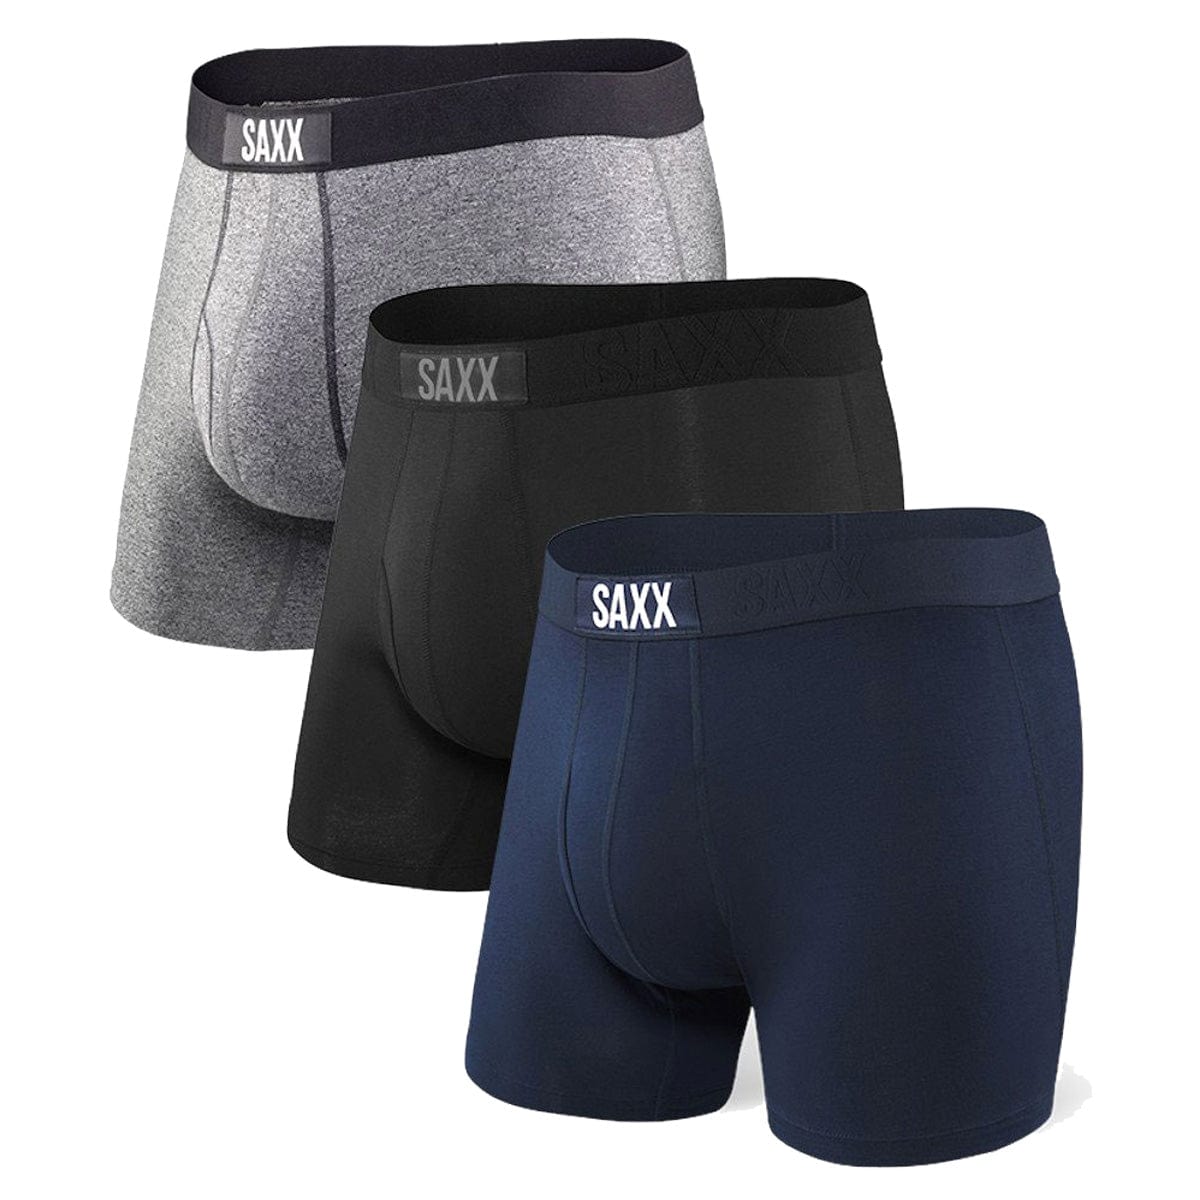 Saxx Vibe Boxers - Black / Grey / Blue (3 Pack) - The Hockey Shop Source For Sports